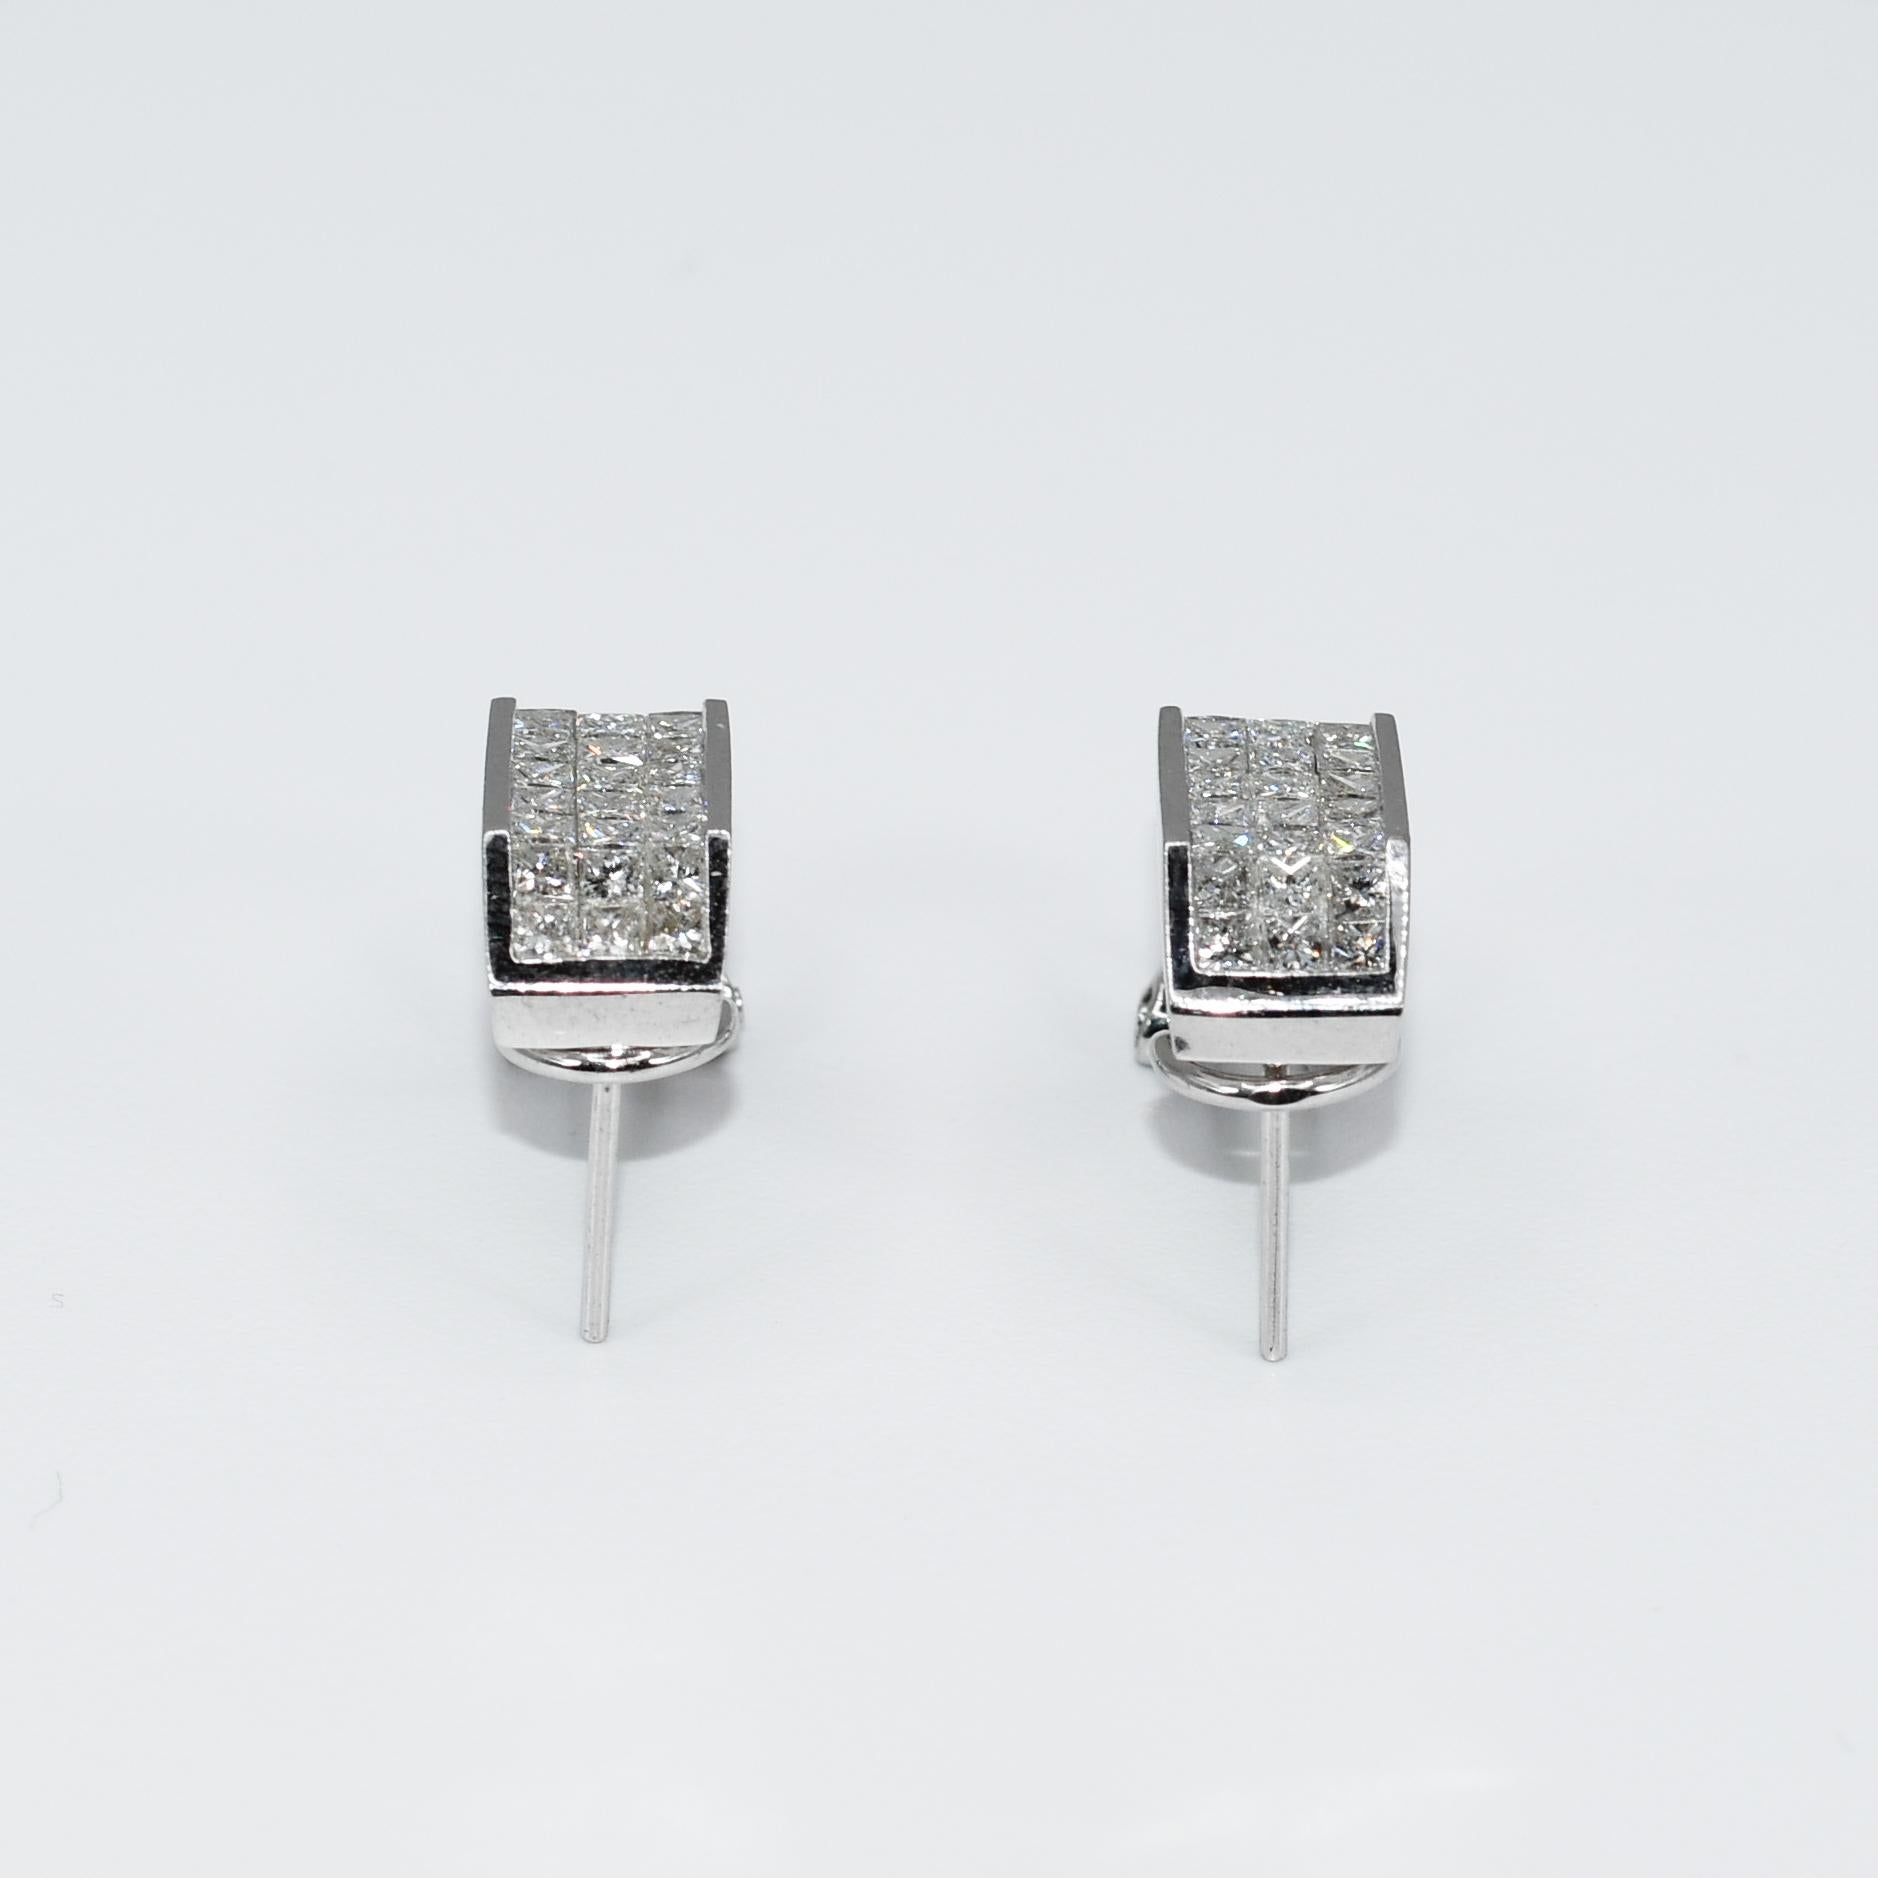 Ladies 18k white gold and diamond earrings.
Stamped 18k, 750 , 1.88 and weighs 6.9 grams.
The diamonds are princess cuts, 1.88 total carats, G,H, i color range, Vs clarity.
The three rows of diamonds are invisible set.
The earring measure 17mm in